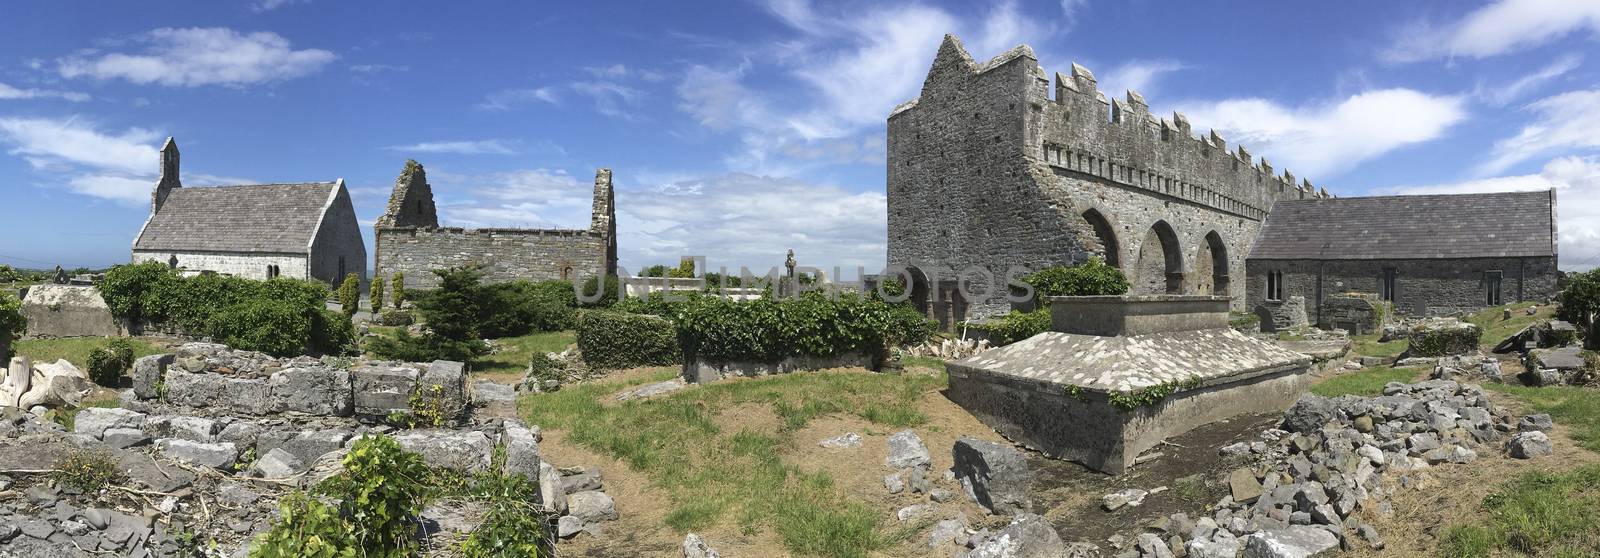 The ruins of Ardfert Cathedral in County Kerry in the Republic of Ireland. Ardfert was the site of a Celtic Christian monastery reputedly founded in the 6th century by Saint Brendan.